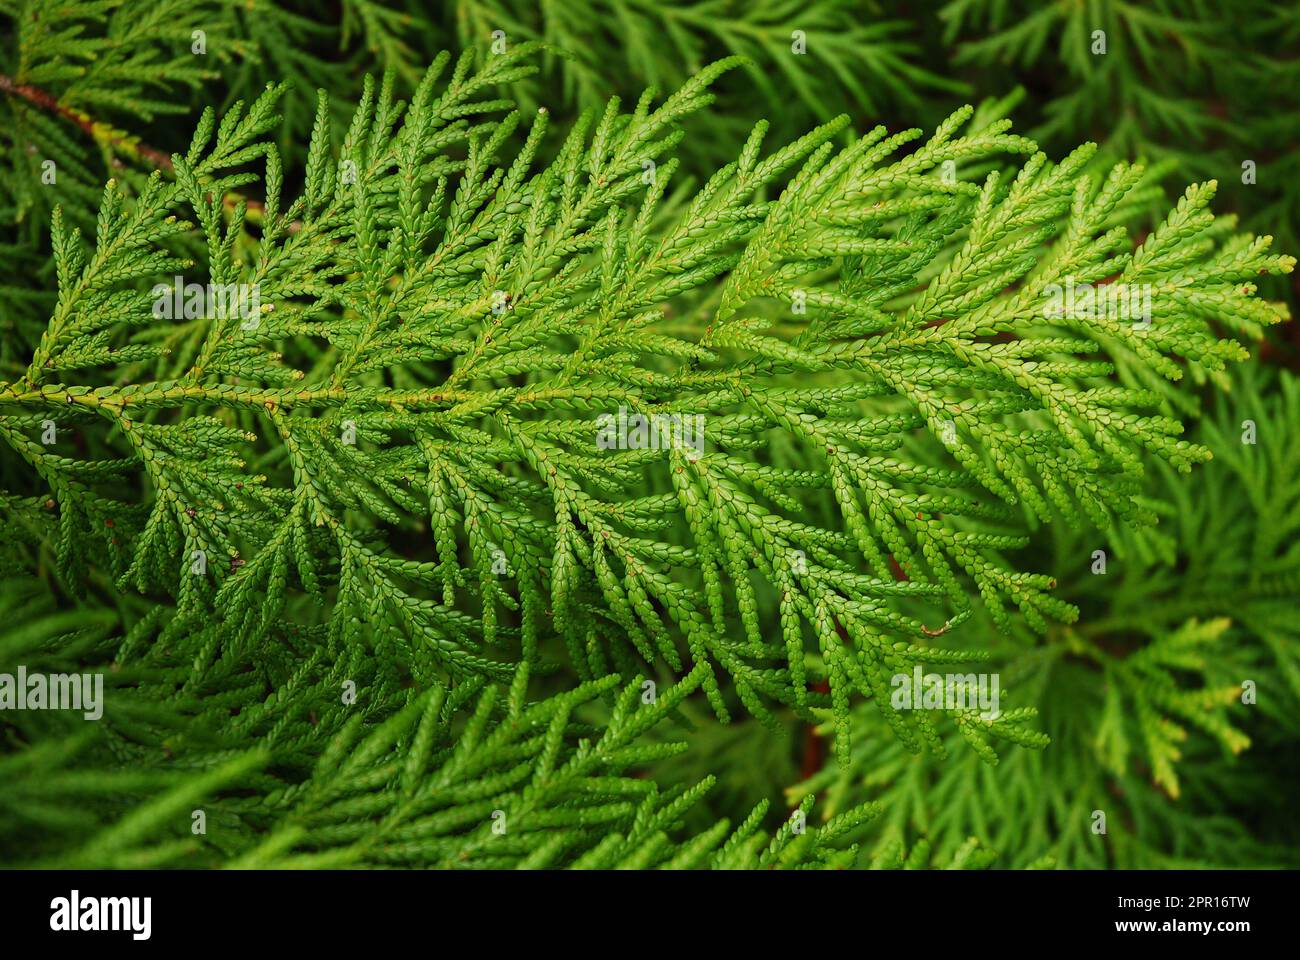 The thujopsis dolabrata tree grows in the garden. A twig with evergreen leaves. Stock Photo